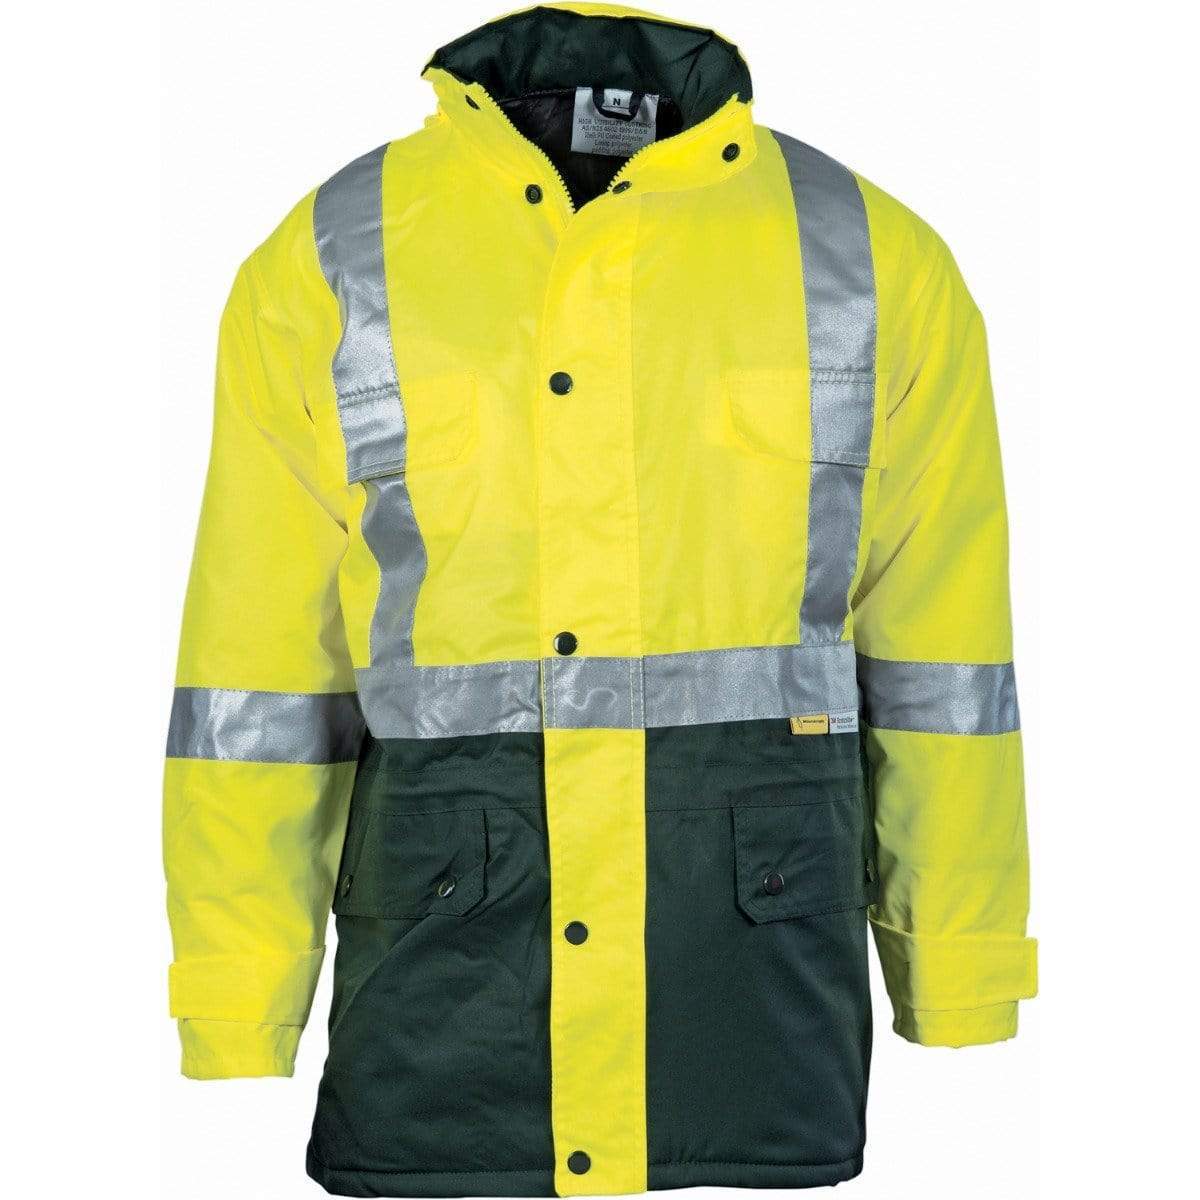 Dnc Workwear Hi-vis Two-tone Quilted Jacket With 3m Reflective Tape - 3863 Work Wear DNC Workwear Yellow/Bottle Green S 